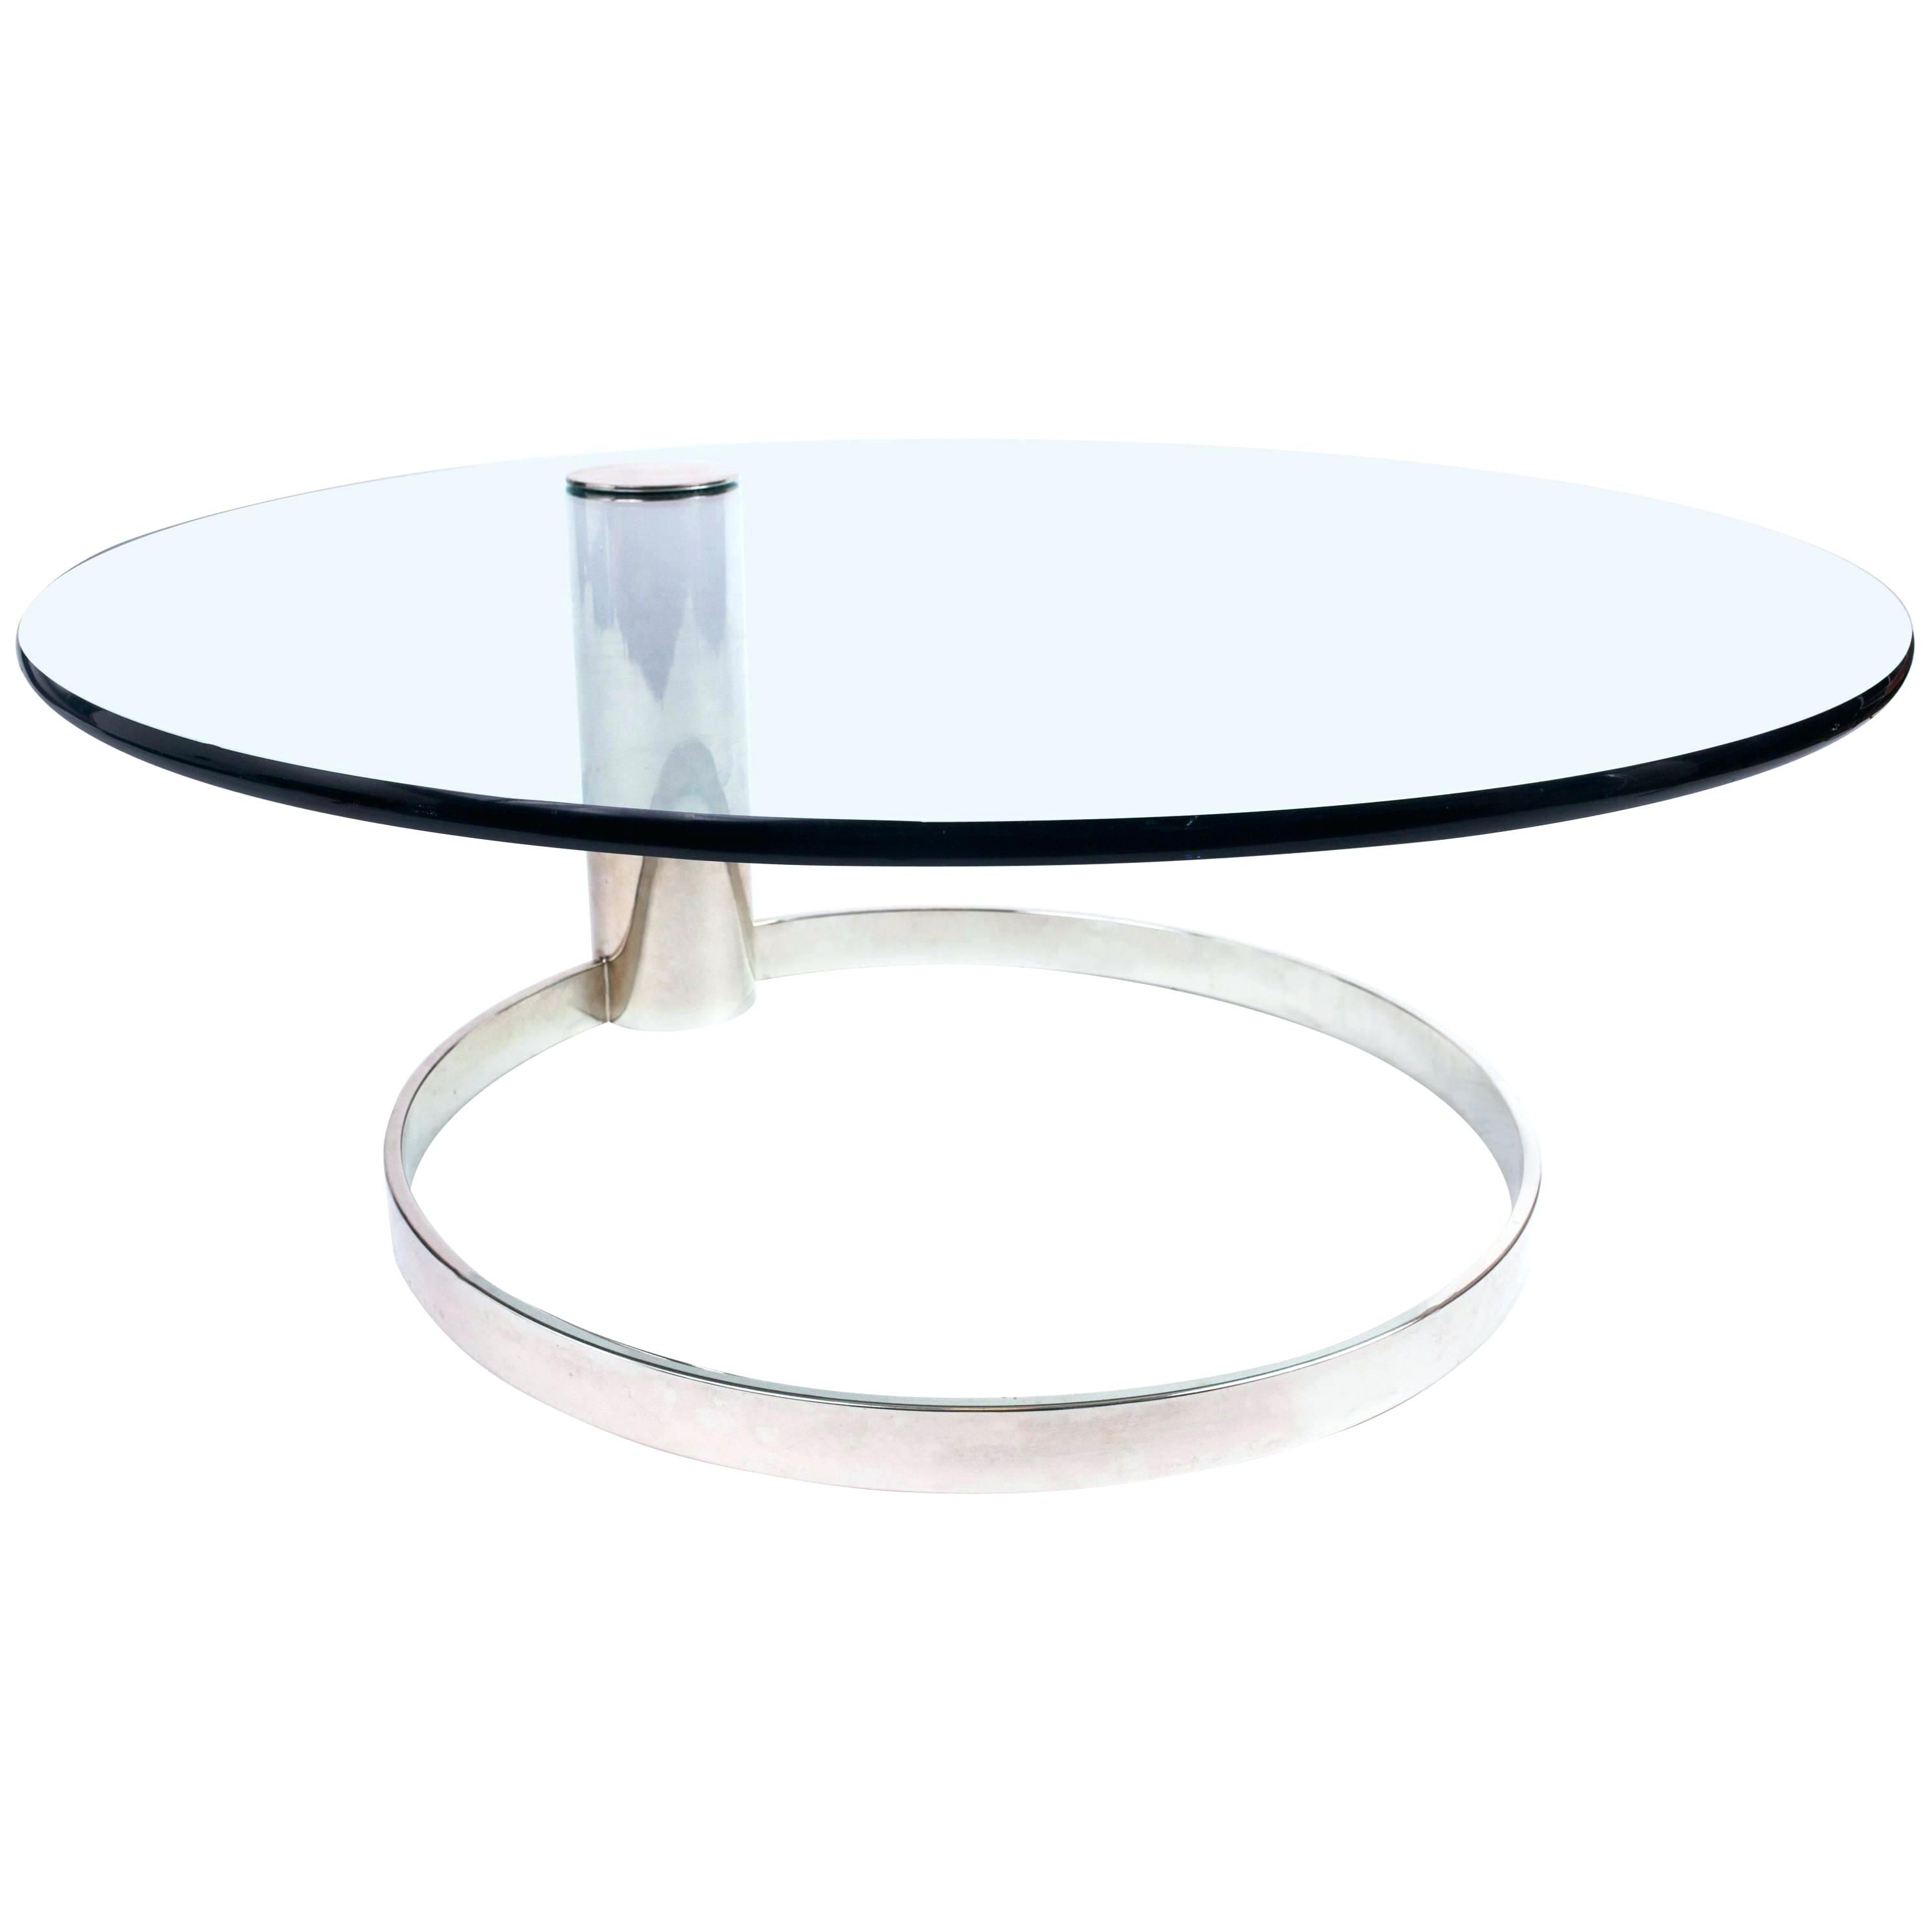 Round Glass And Chrome Coffee Table – Boonapp (View 5 of 20)